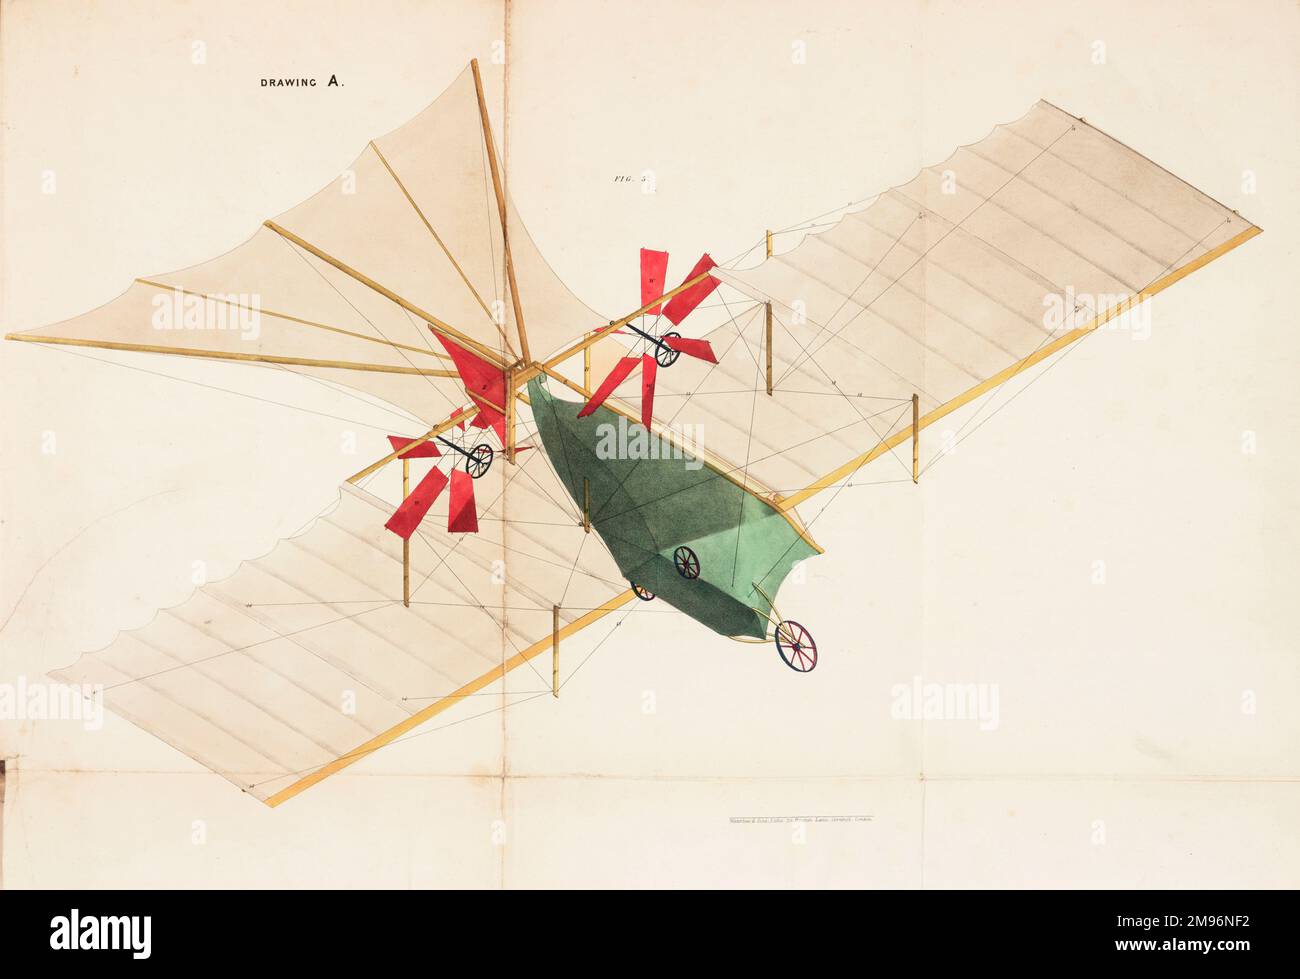 The Aerial Steam Carriage -- underside view with covering fabric in place. This flying machine was patented by William Samuel Henson (1812-1888) and John Stringfellow (1799-1883) in 1842. Stock Photo